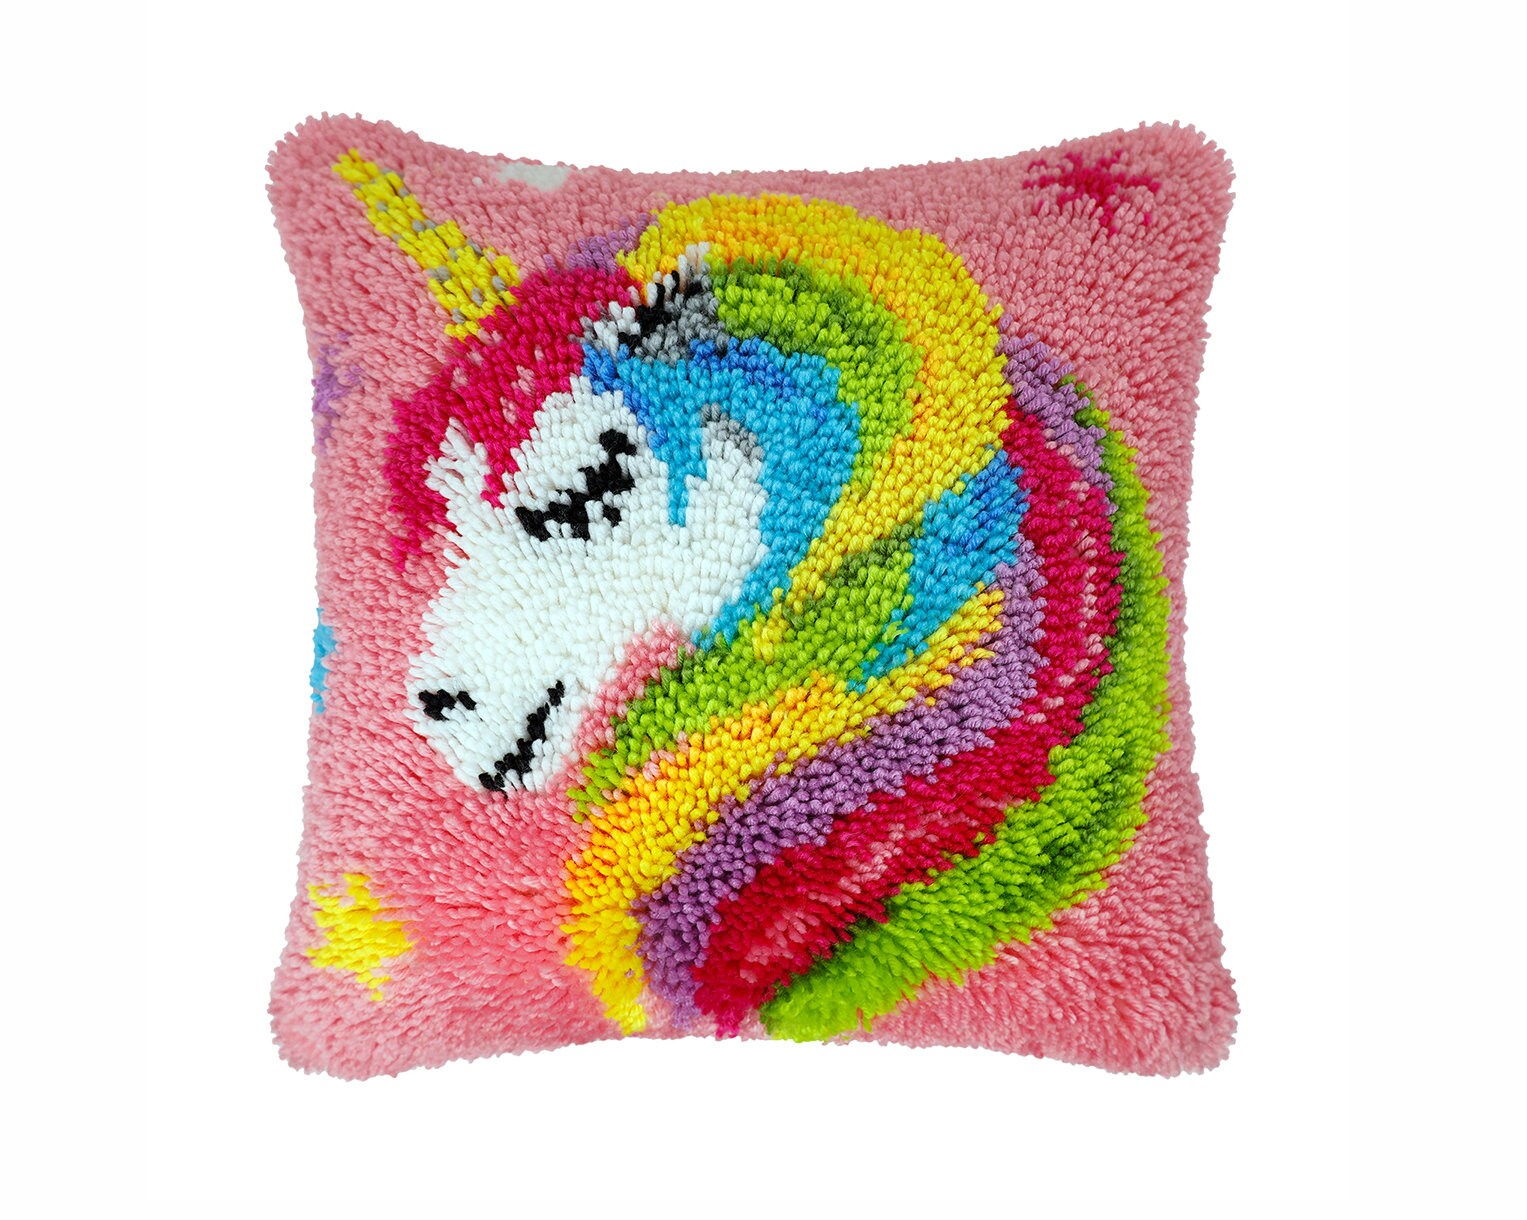 B Me DIY Unicorn Latch Hook Kit for Girls – Mini Rug Sewing Set with 15 Colorful Yarn Bundles, Color-Coded Canvas, DIY Grils Bed